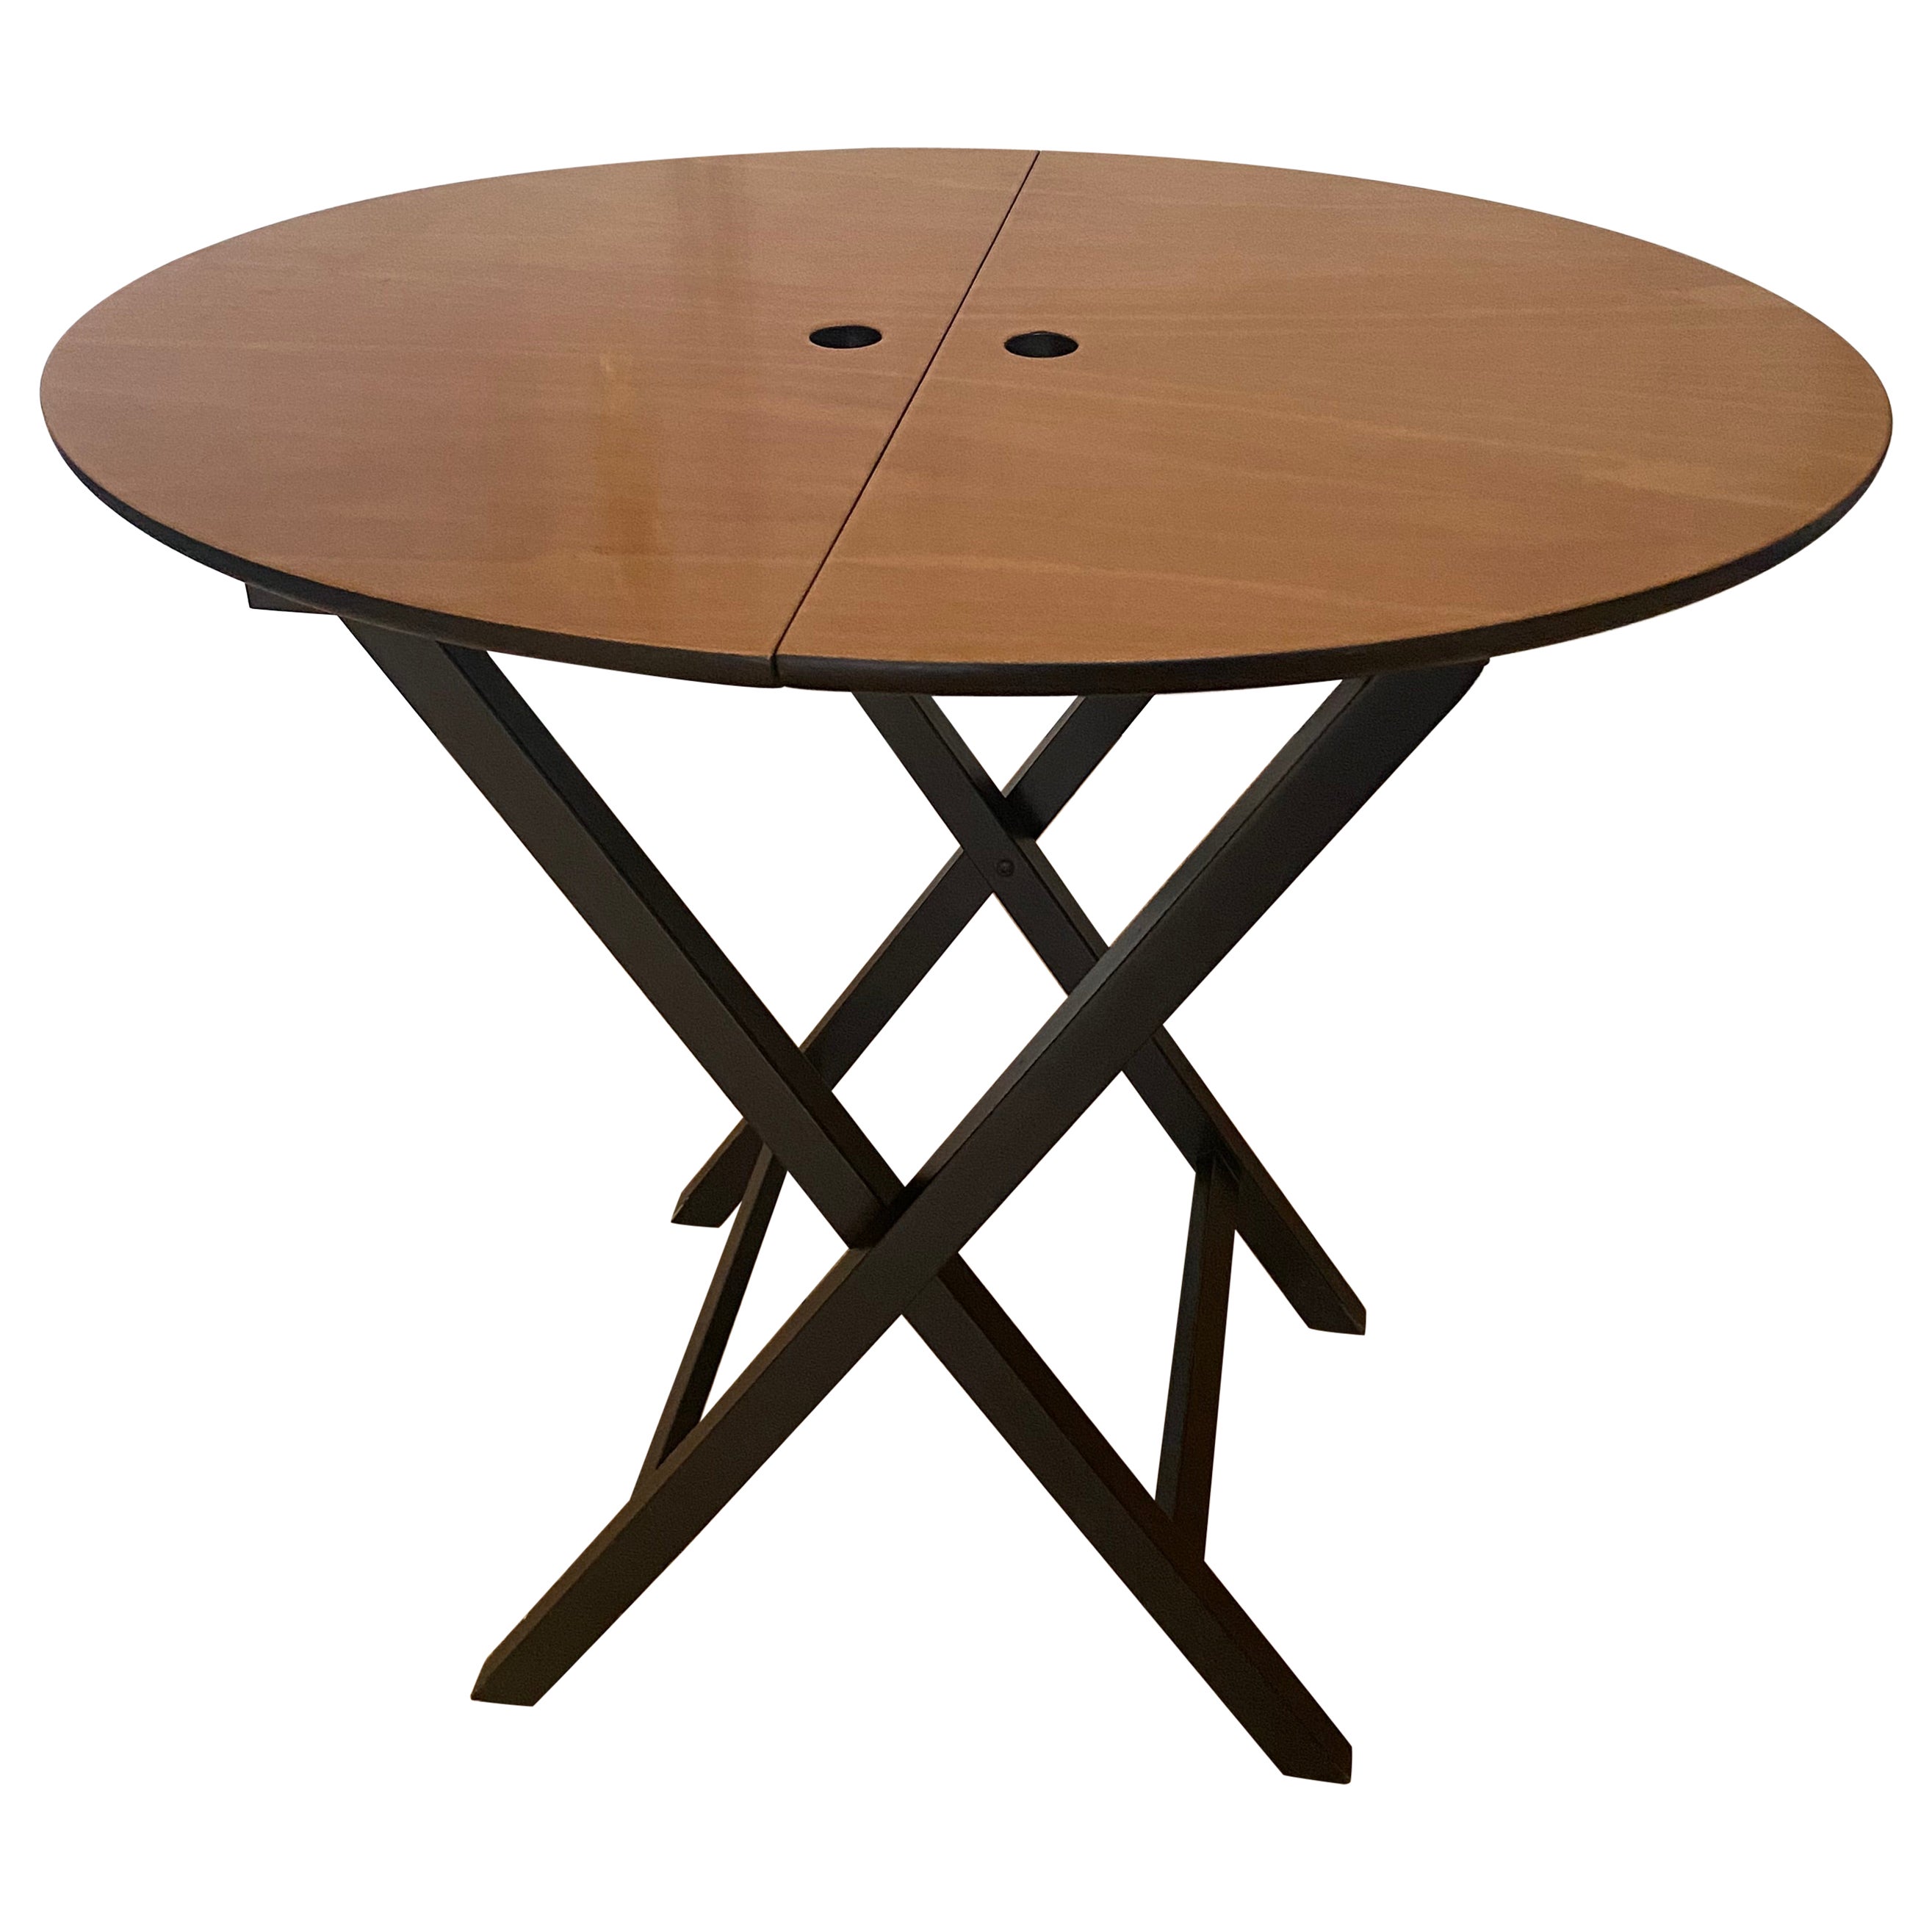 "Battista Folding" Table by Romeo Sozzi/ Promemoria with Cherry Wood Surface For Sale